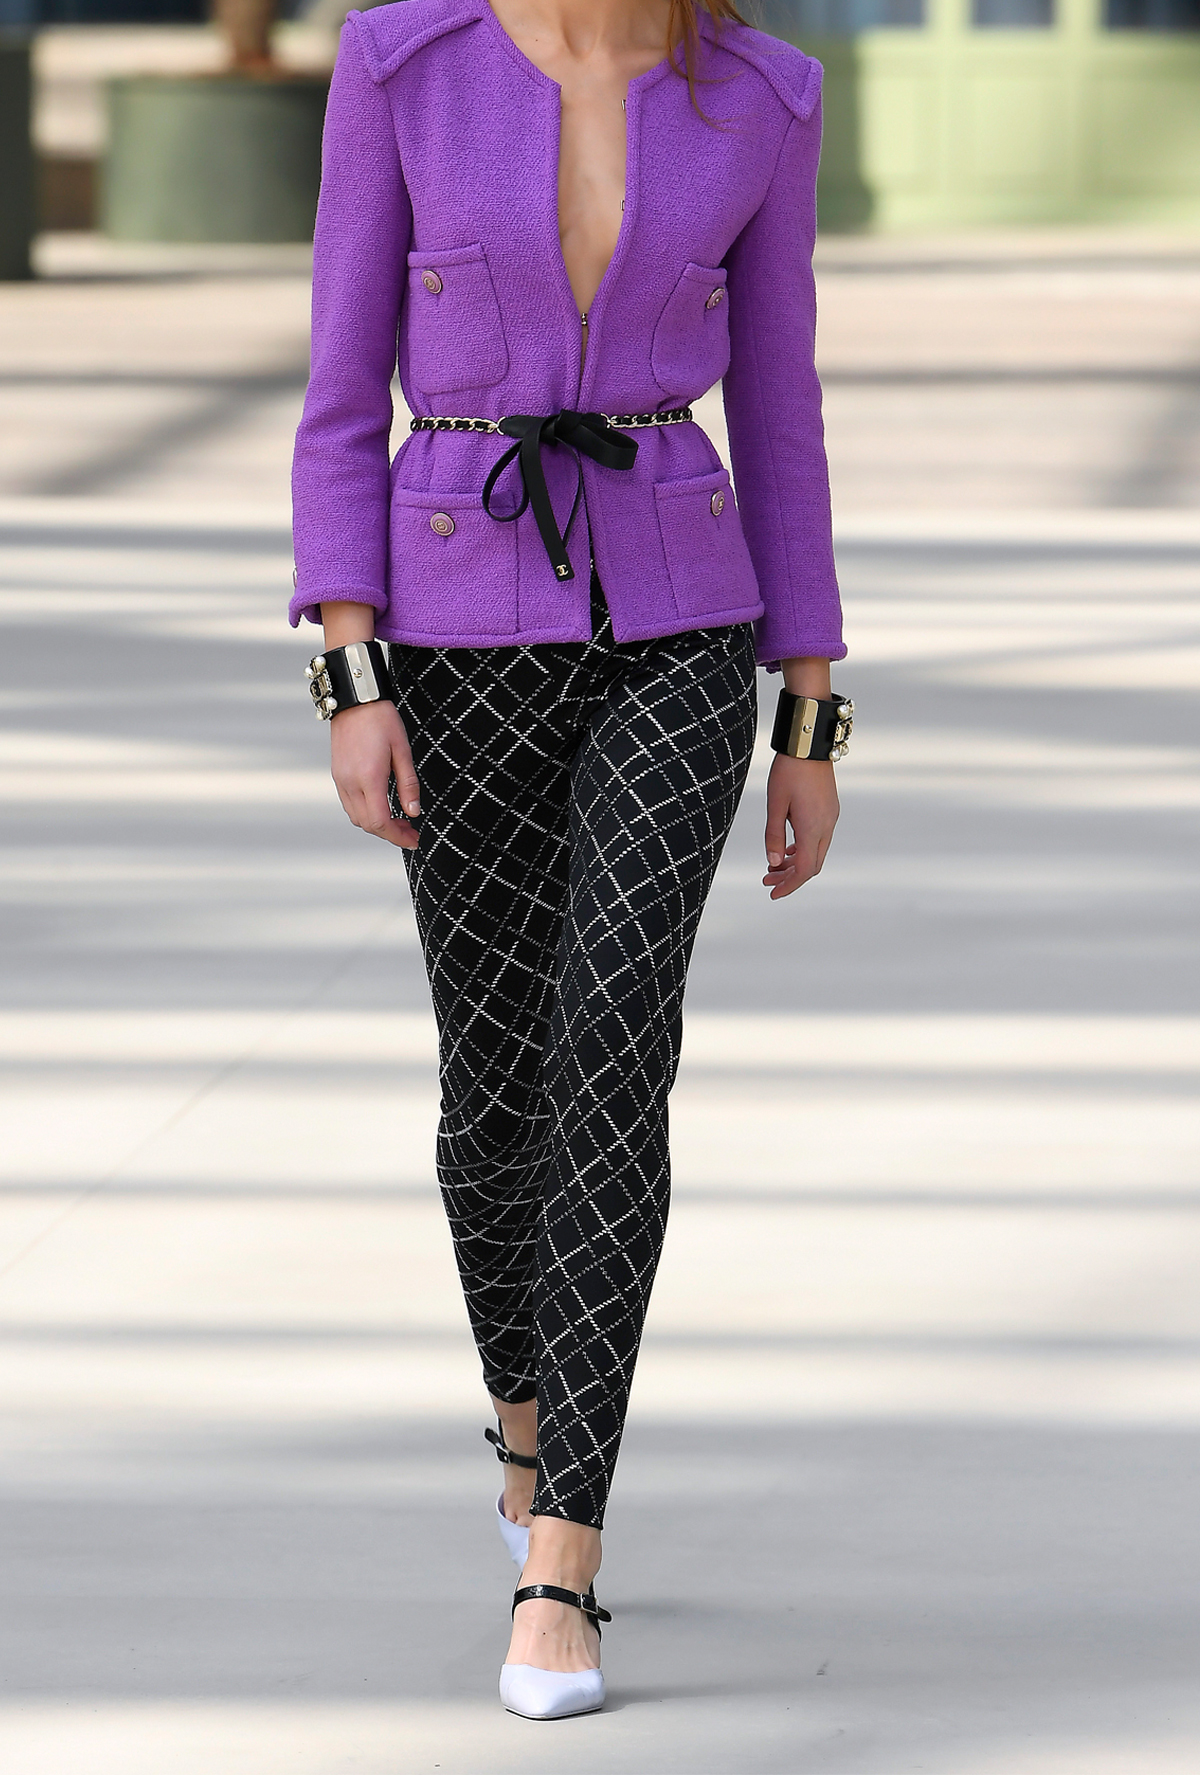 Chanel Is Officially Making Leggings a Fashion Item | Who What Wear UK